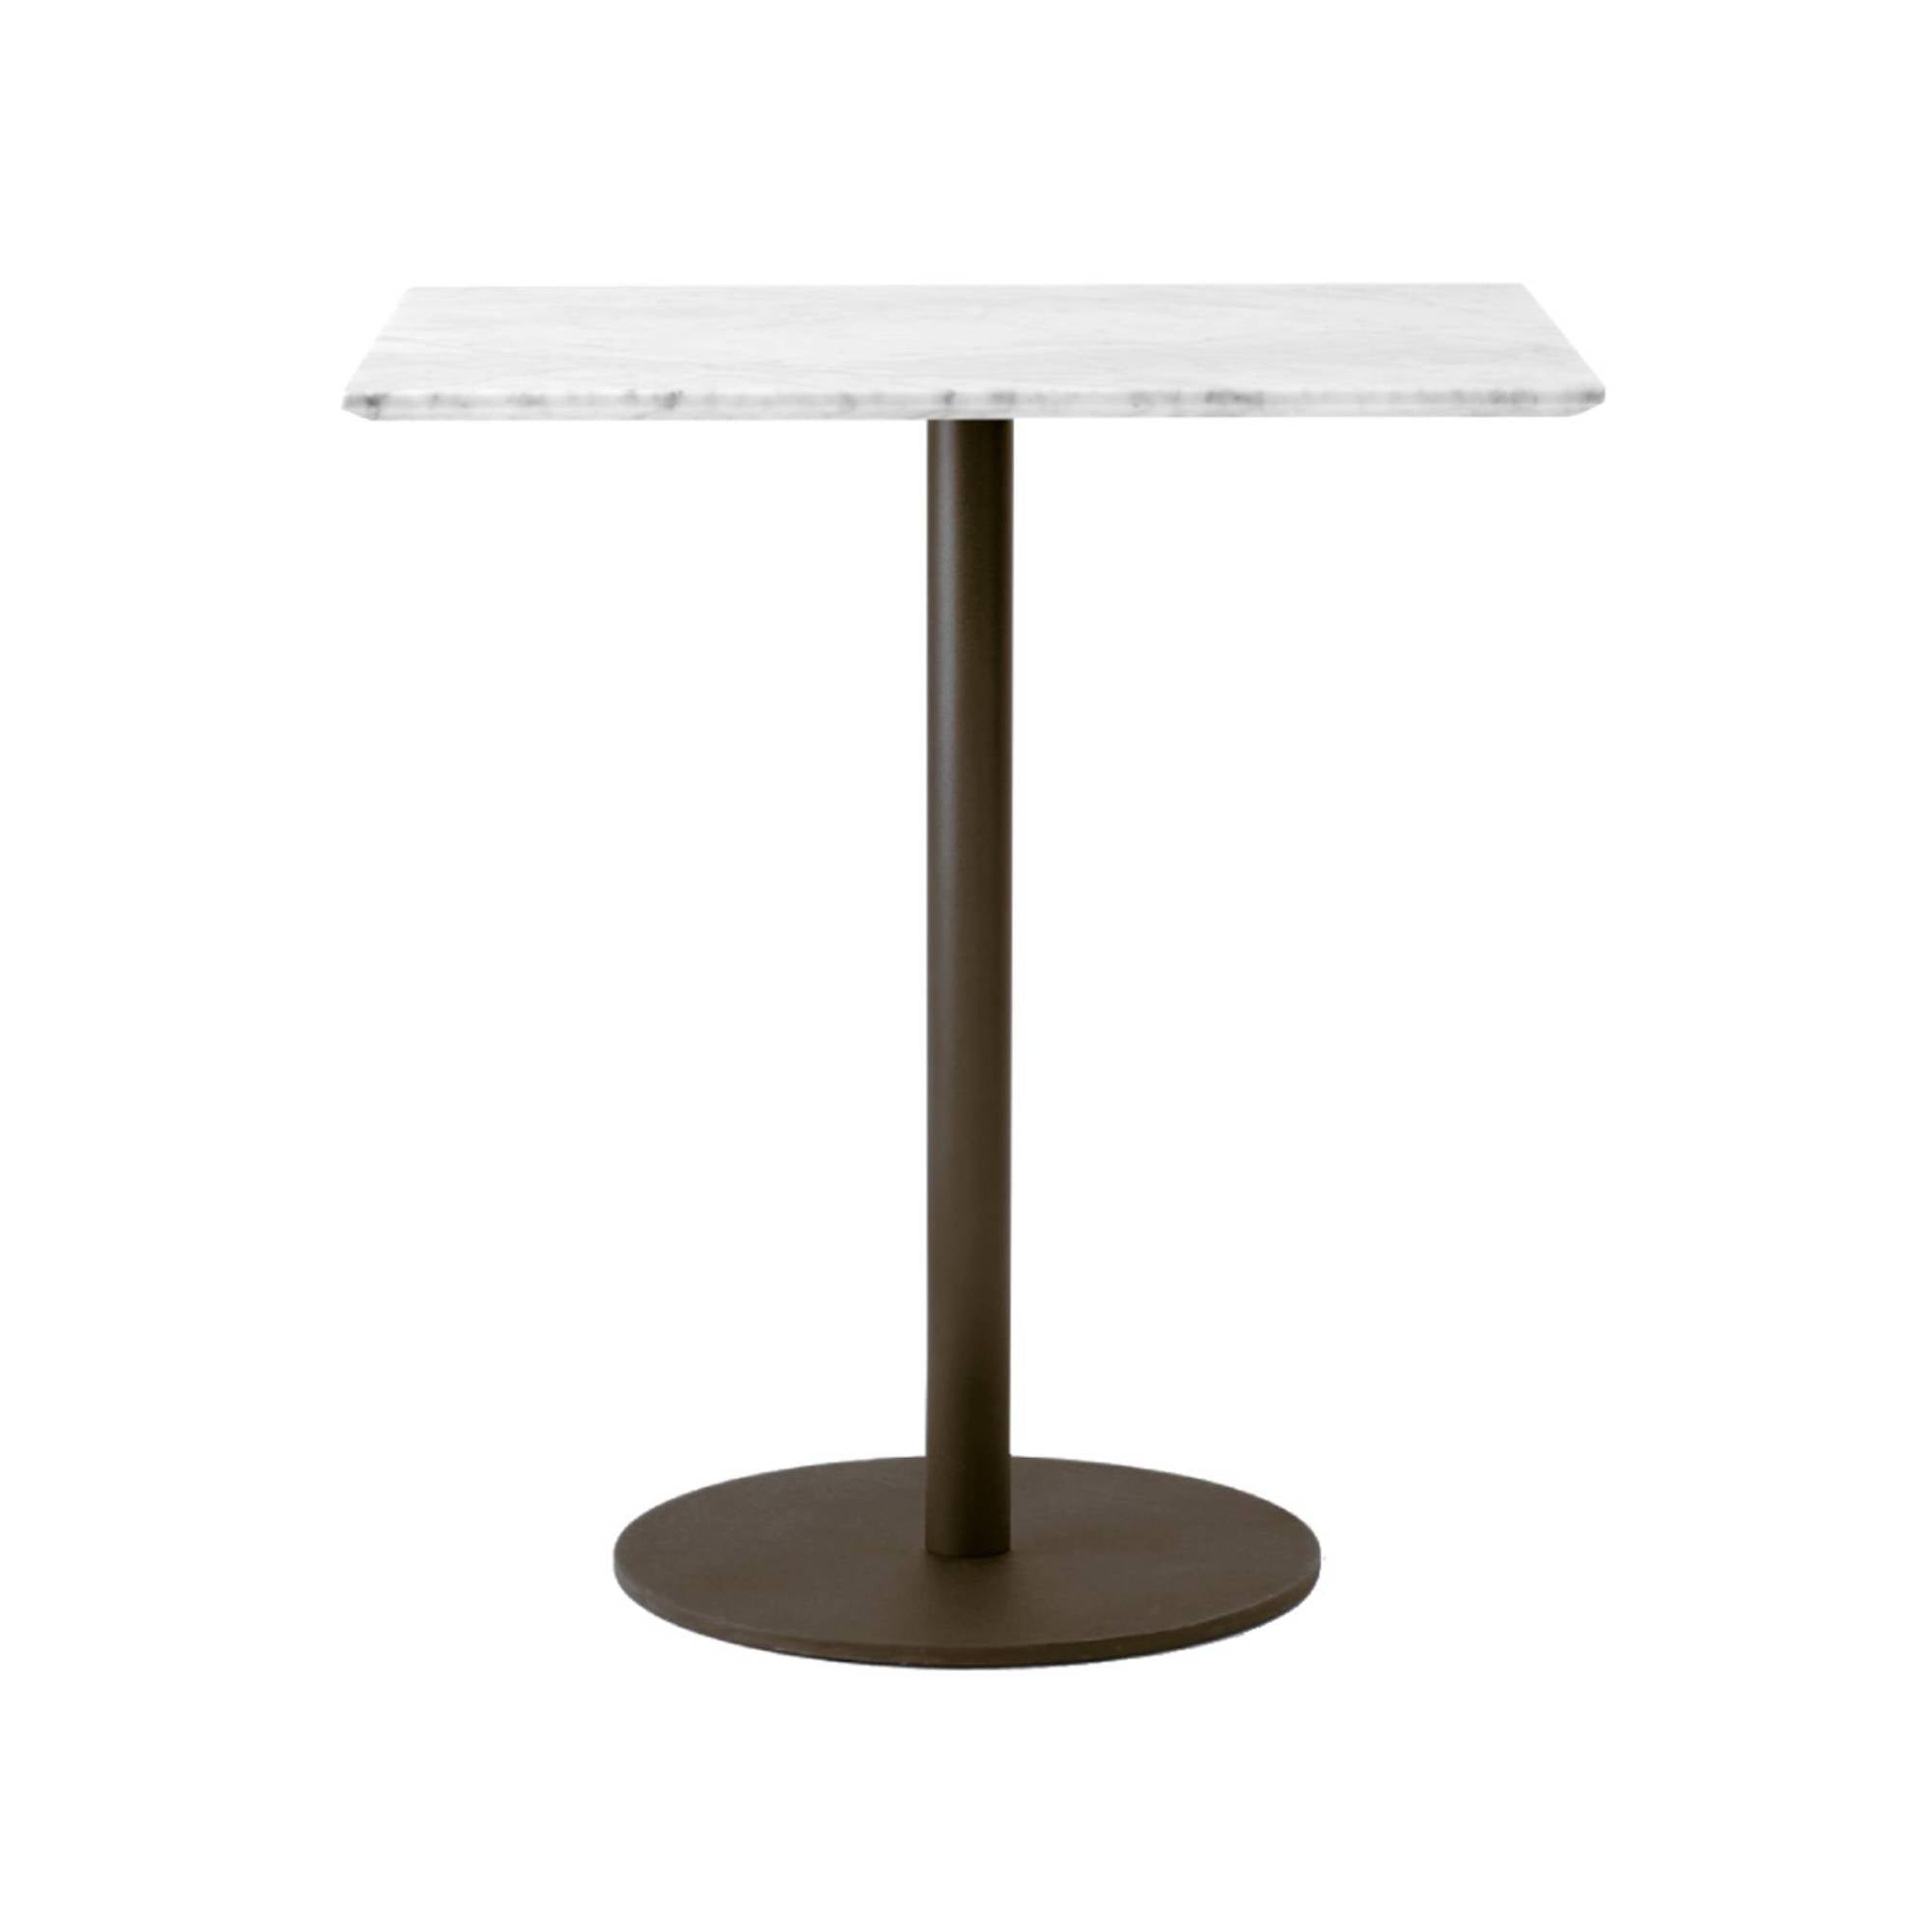 In Between Center Table: SK16 + SK21 + Counter (SK16) + Bronzed + Bianco Carrara Marble